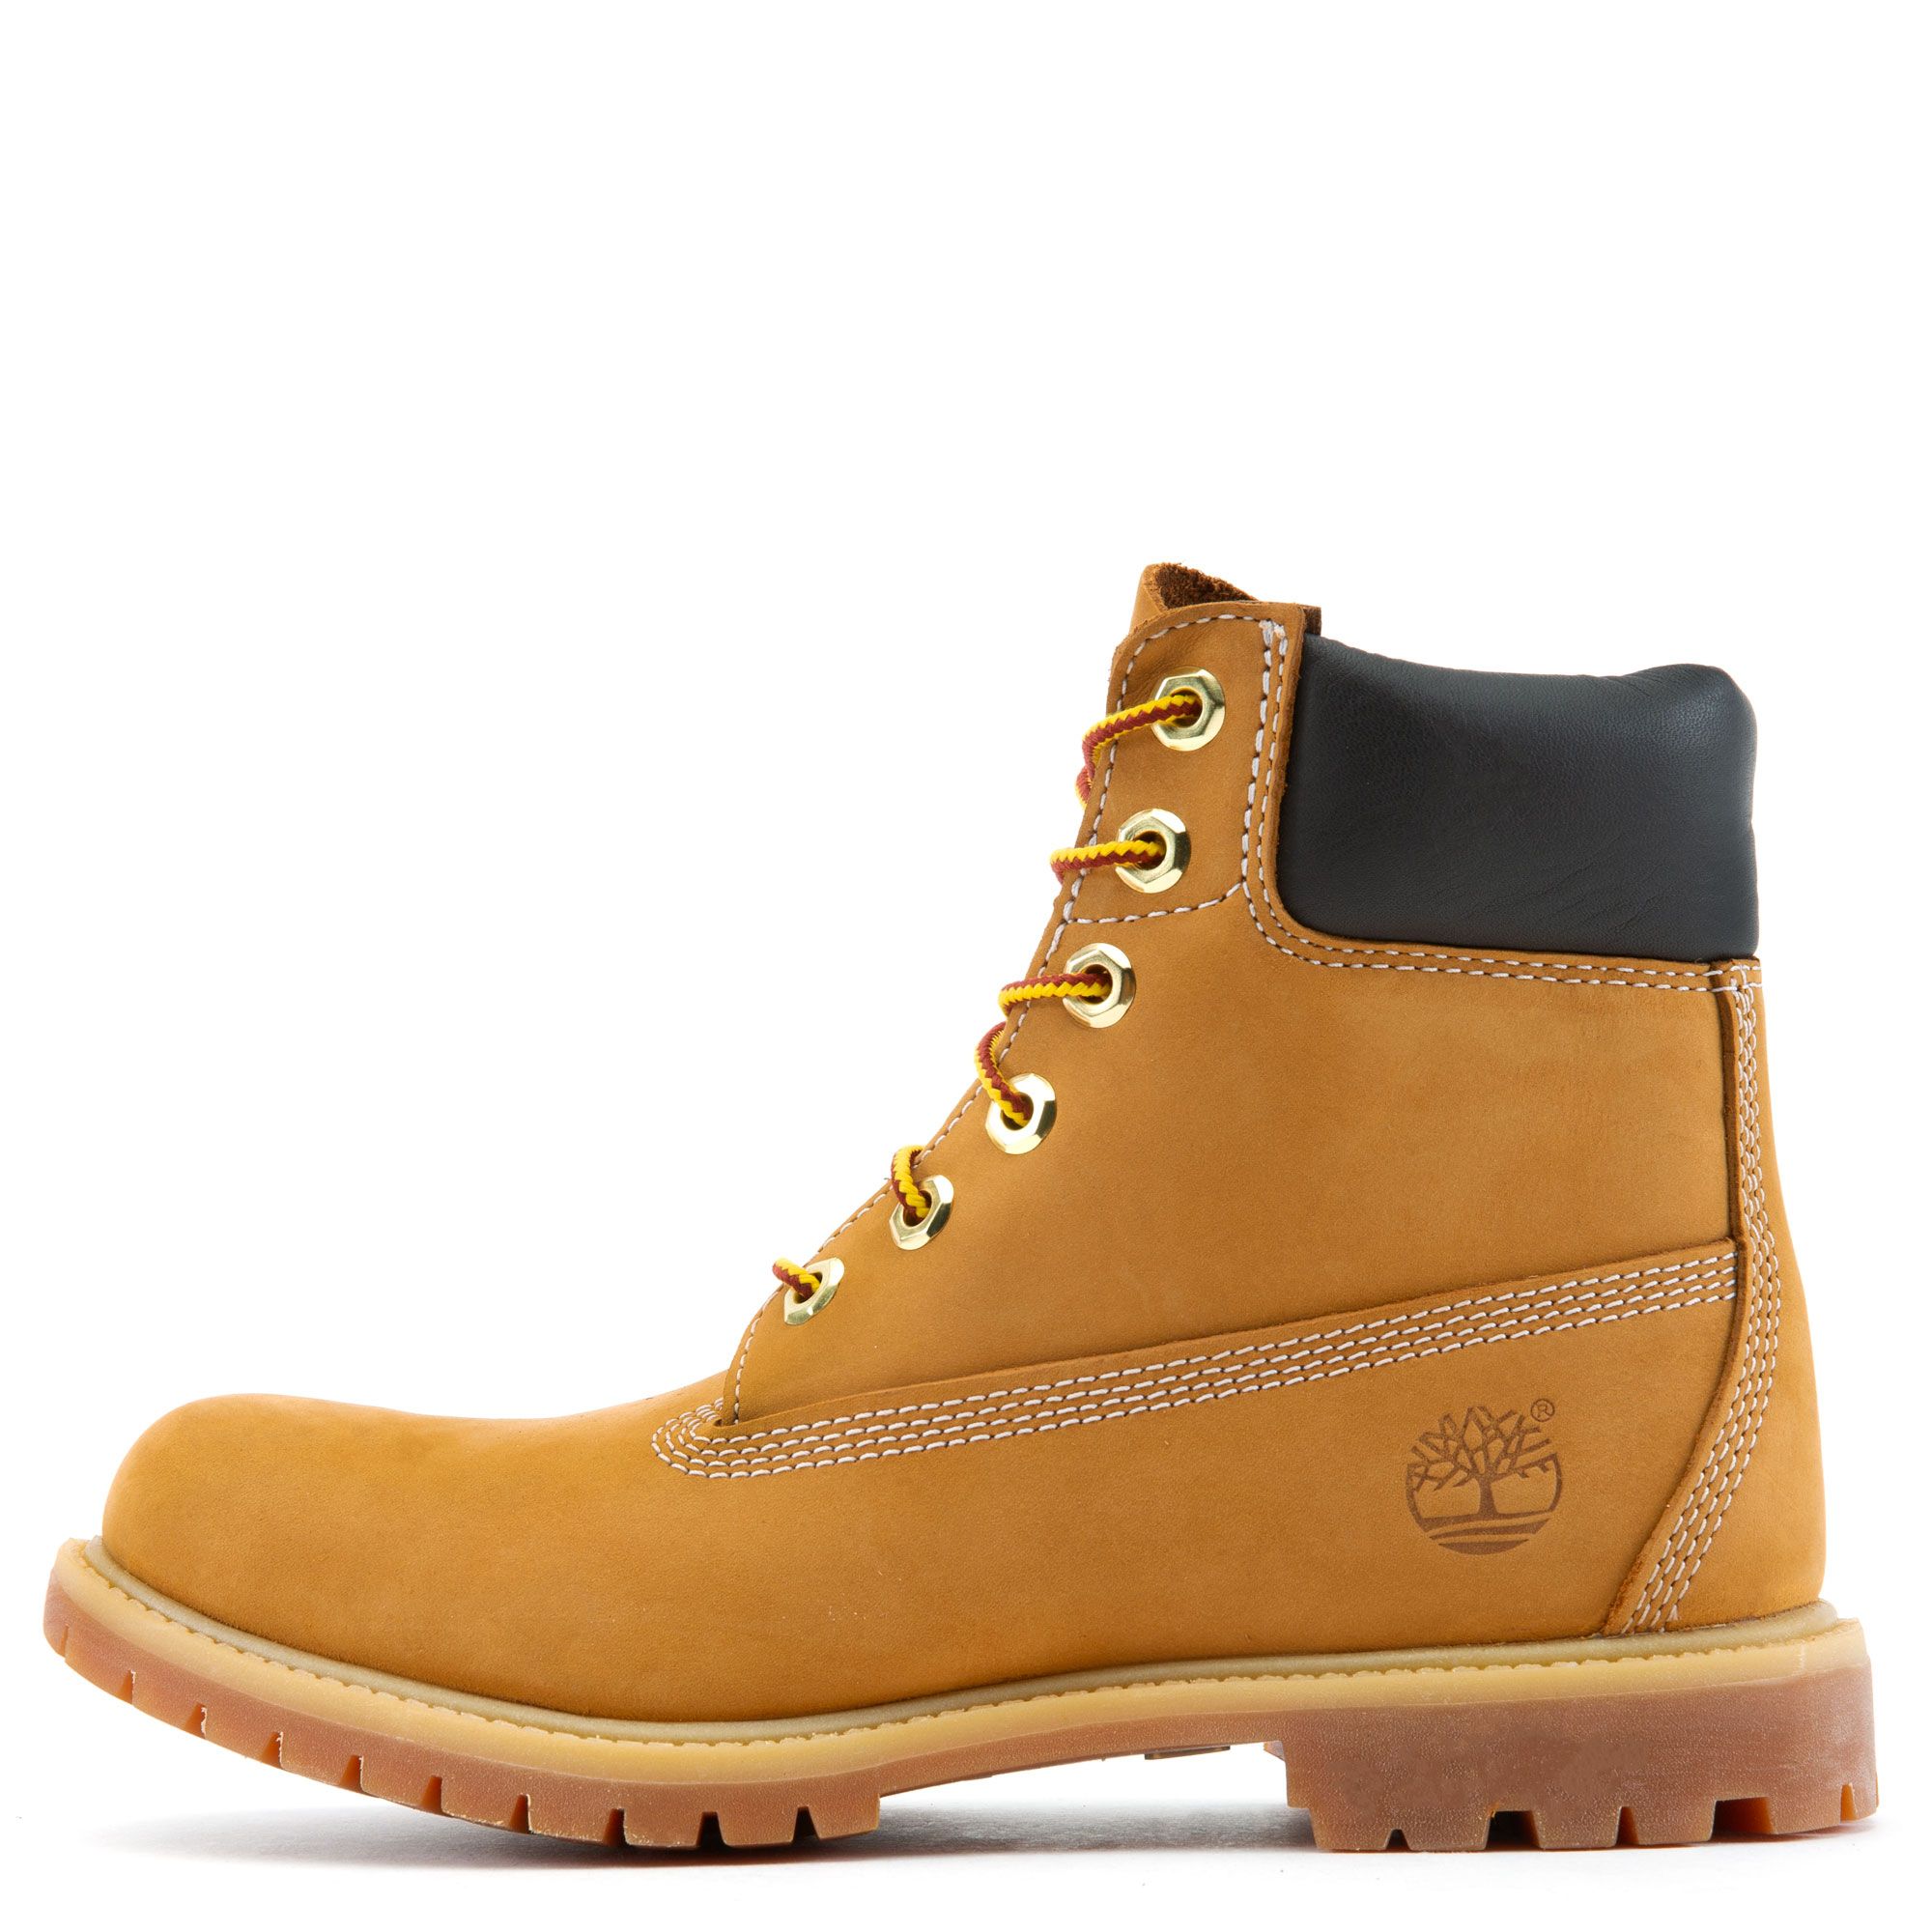 Give rights Wrongdoing Spit TIMBERLAND 6-Inch Premium Waterproof Boot TB010361713 - Shiekh